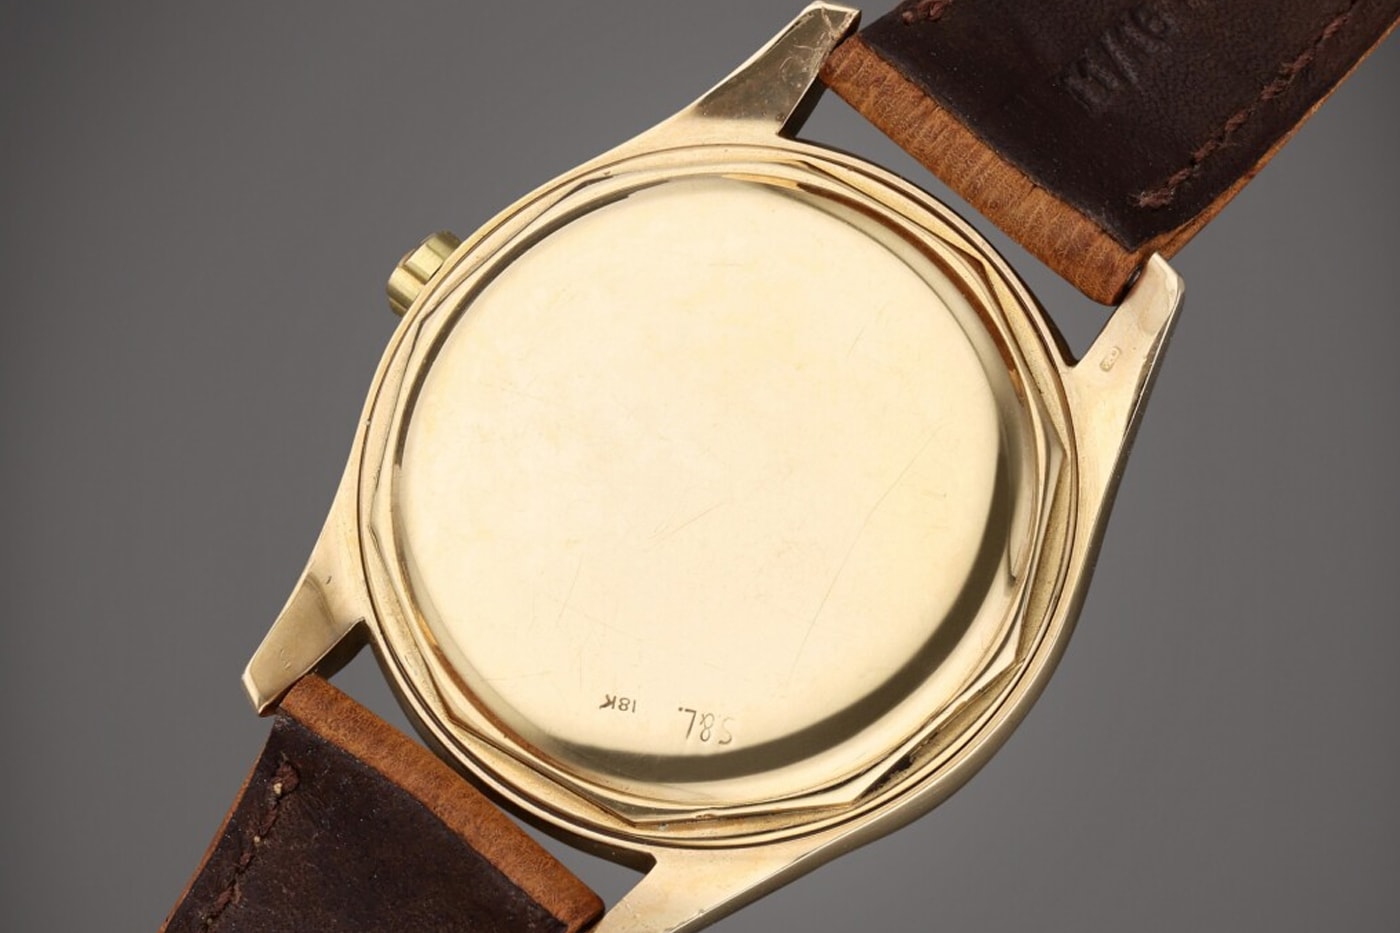 Andy Warhol's Patek Philippe Watch Auction Info